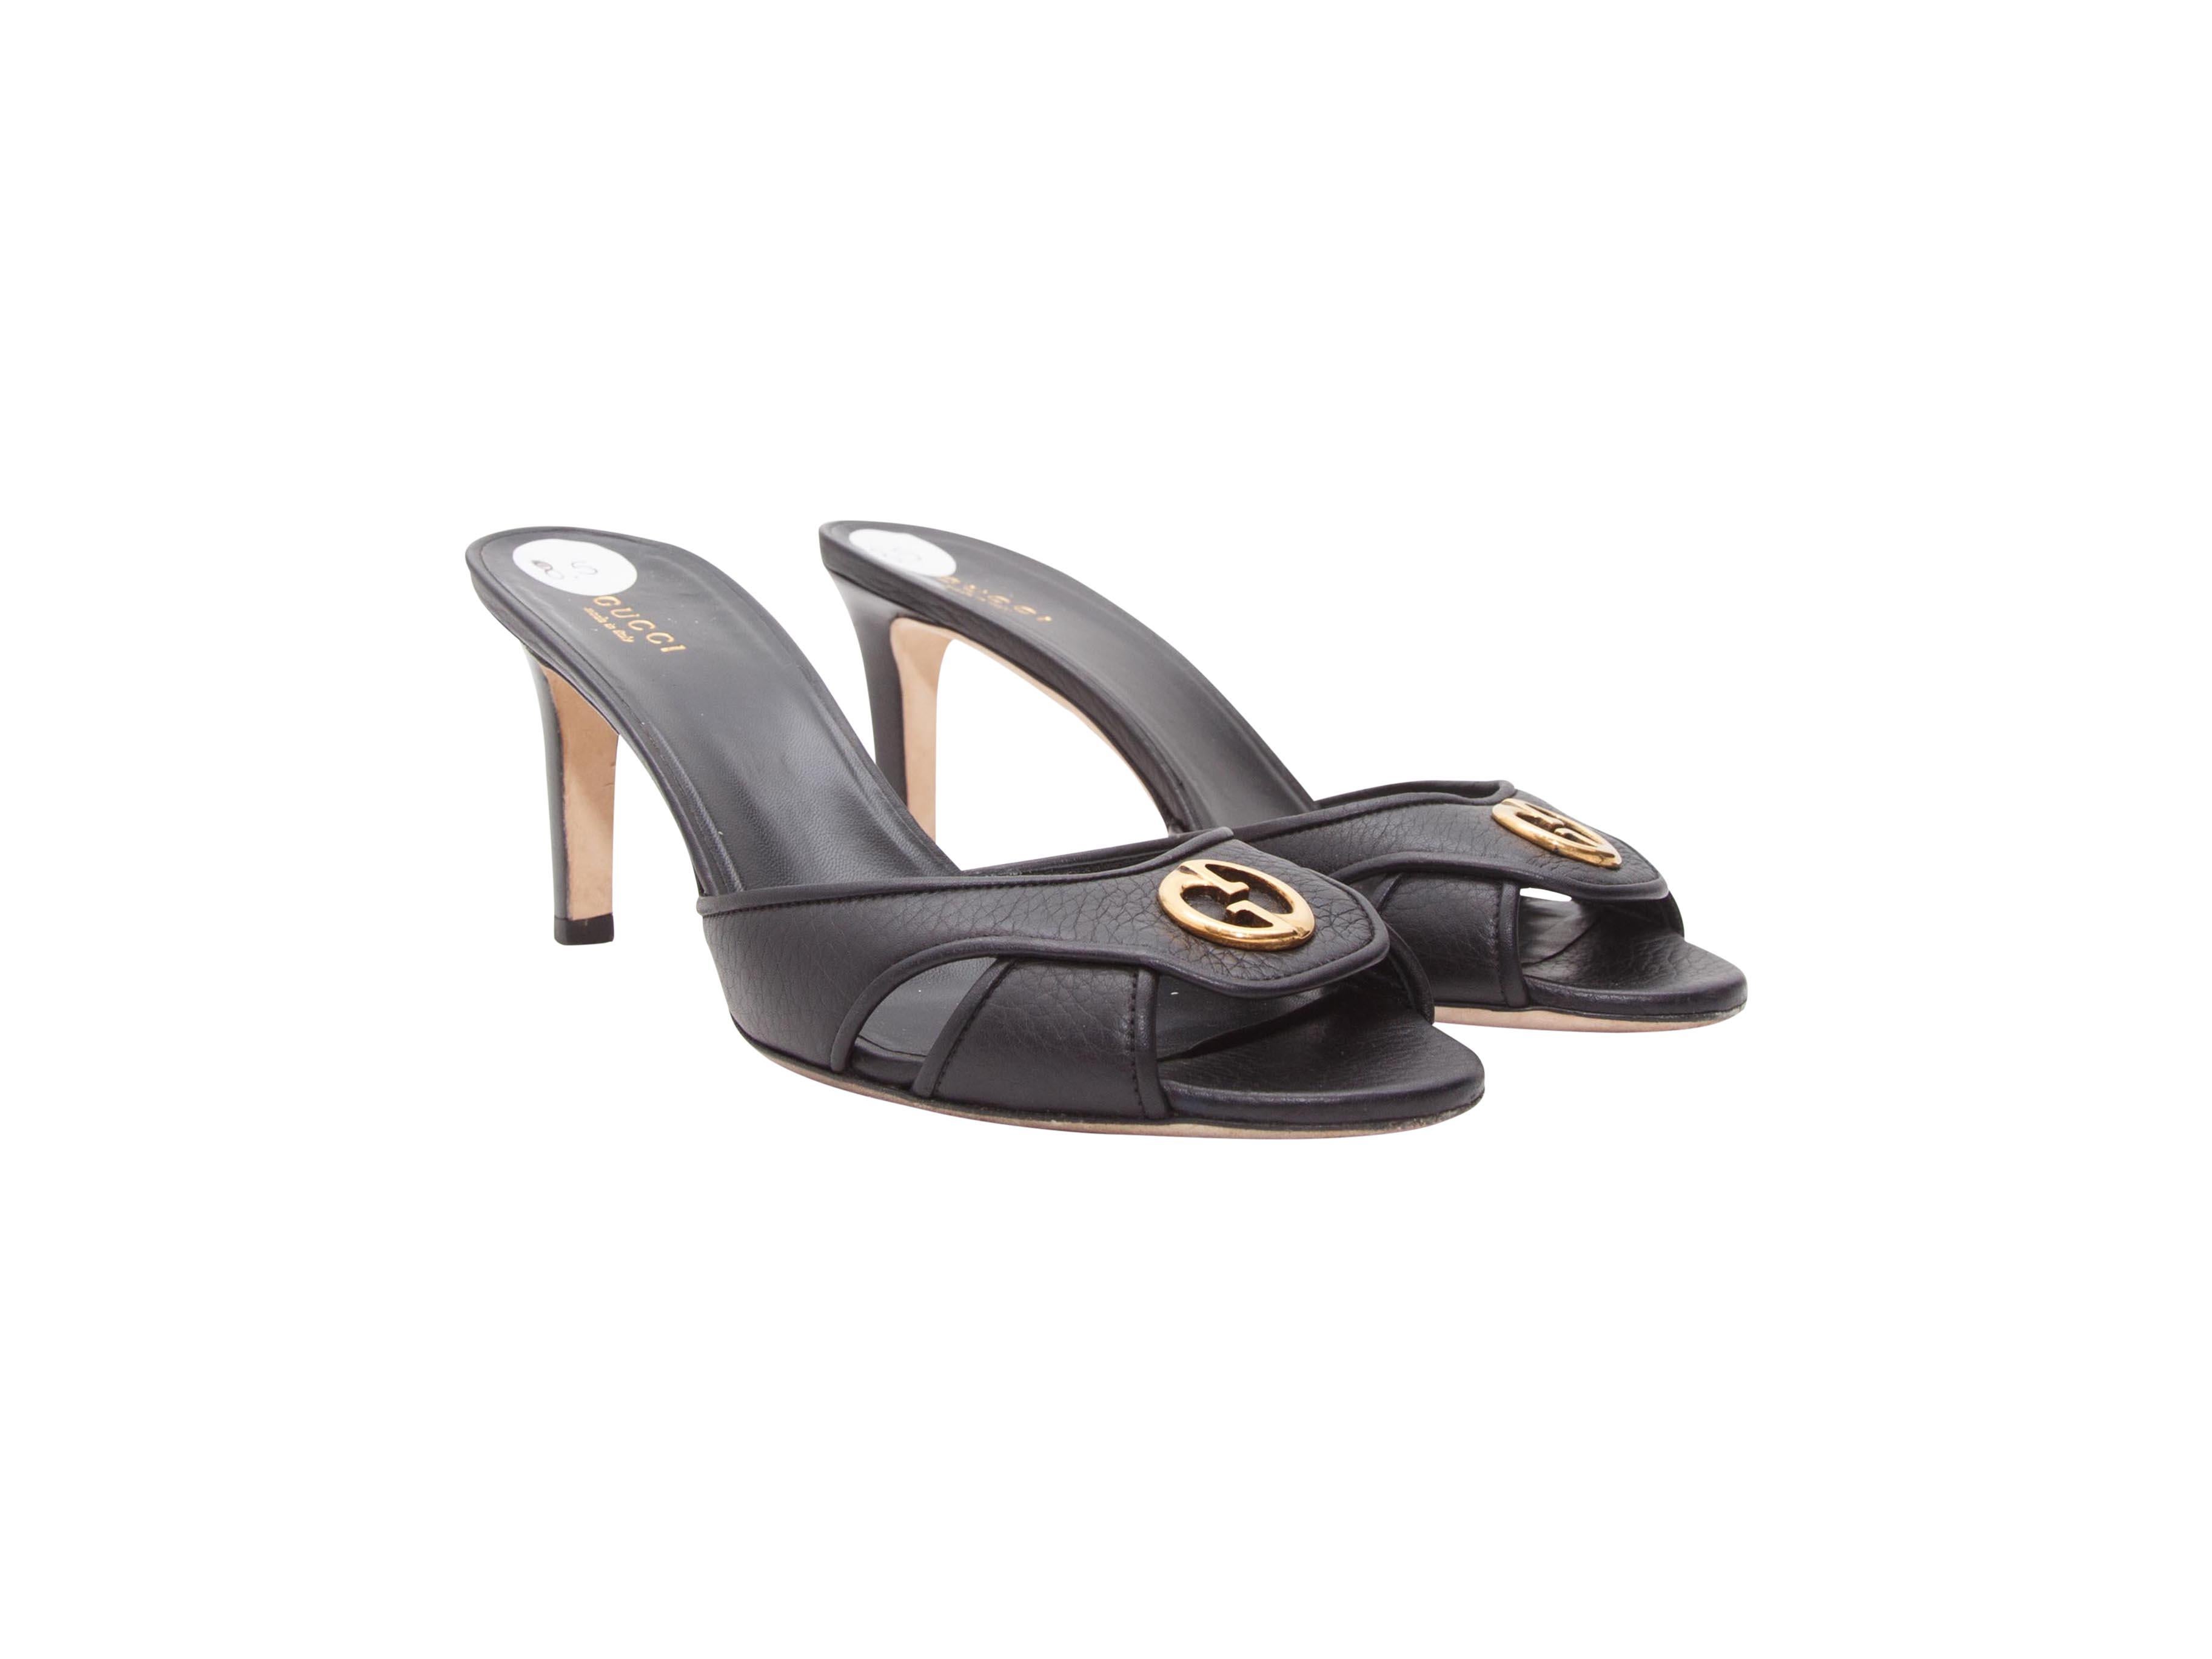 Product details:  Black leather mule kitten heels by Gucci.  Logo detail accents vamp.  Open toe.  Slip-on style.  Goldtone hardware.  3